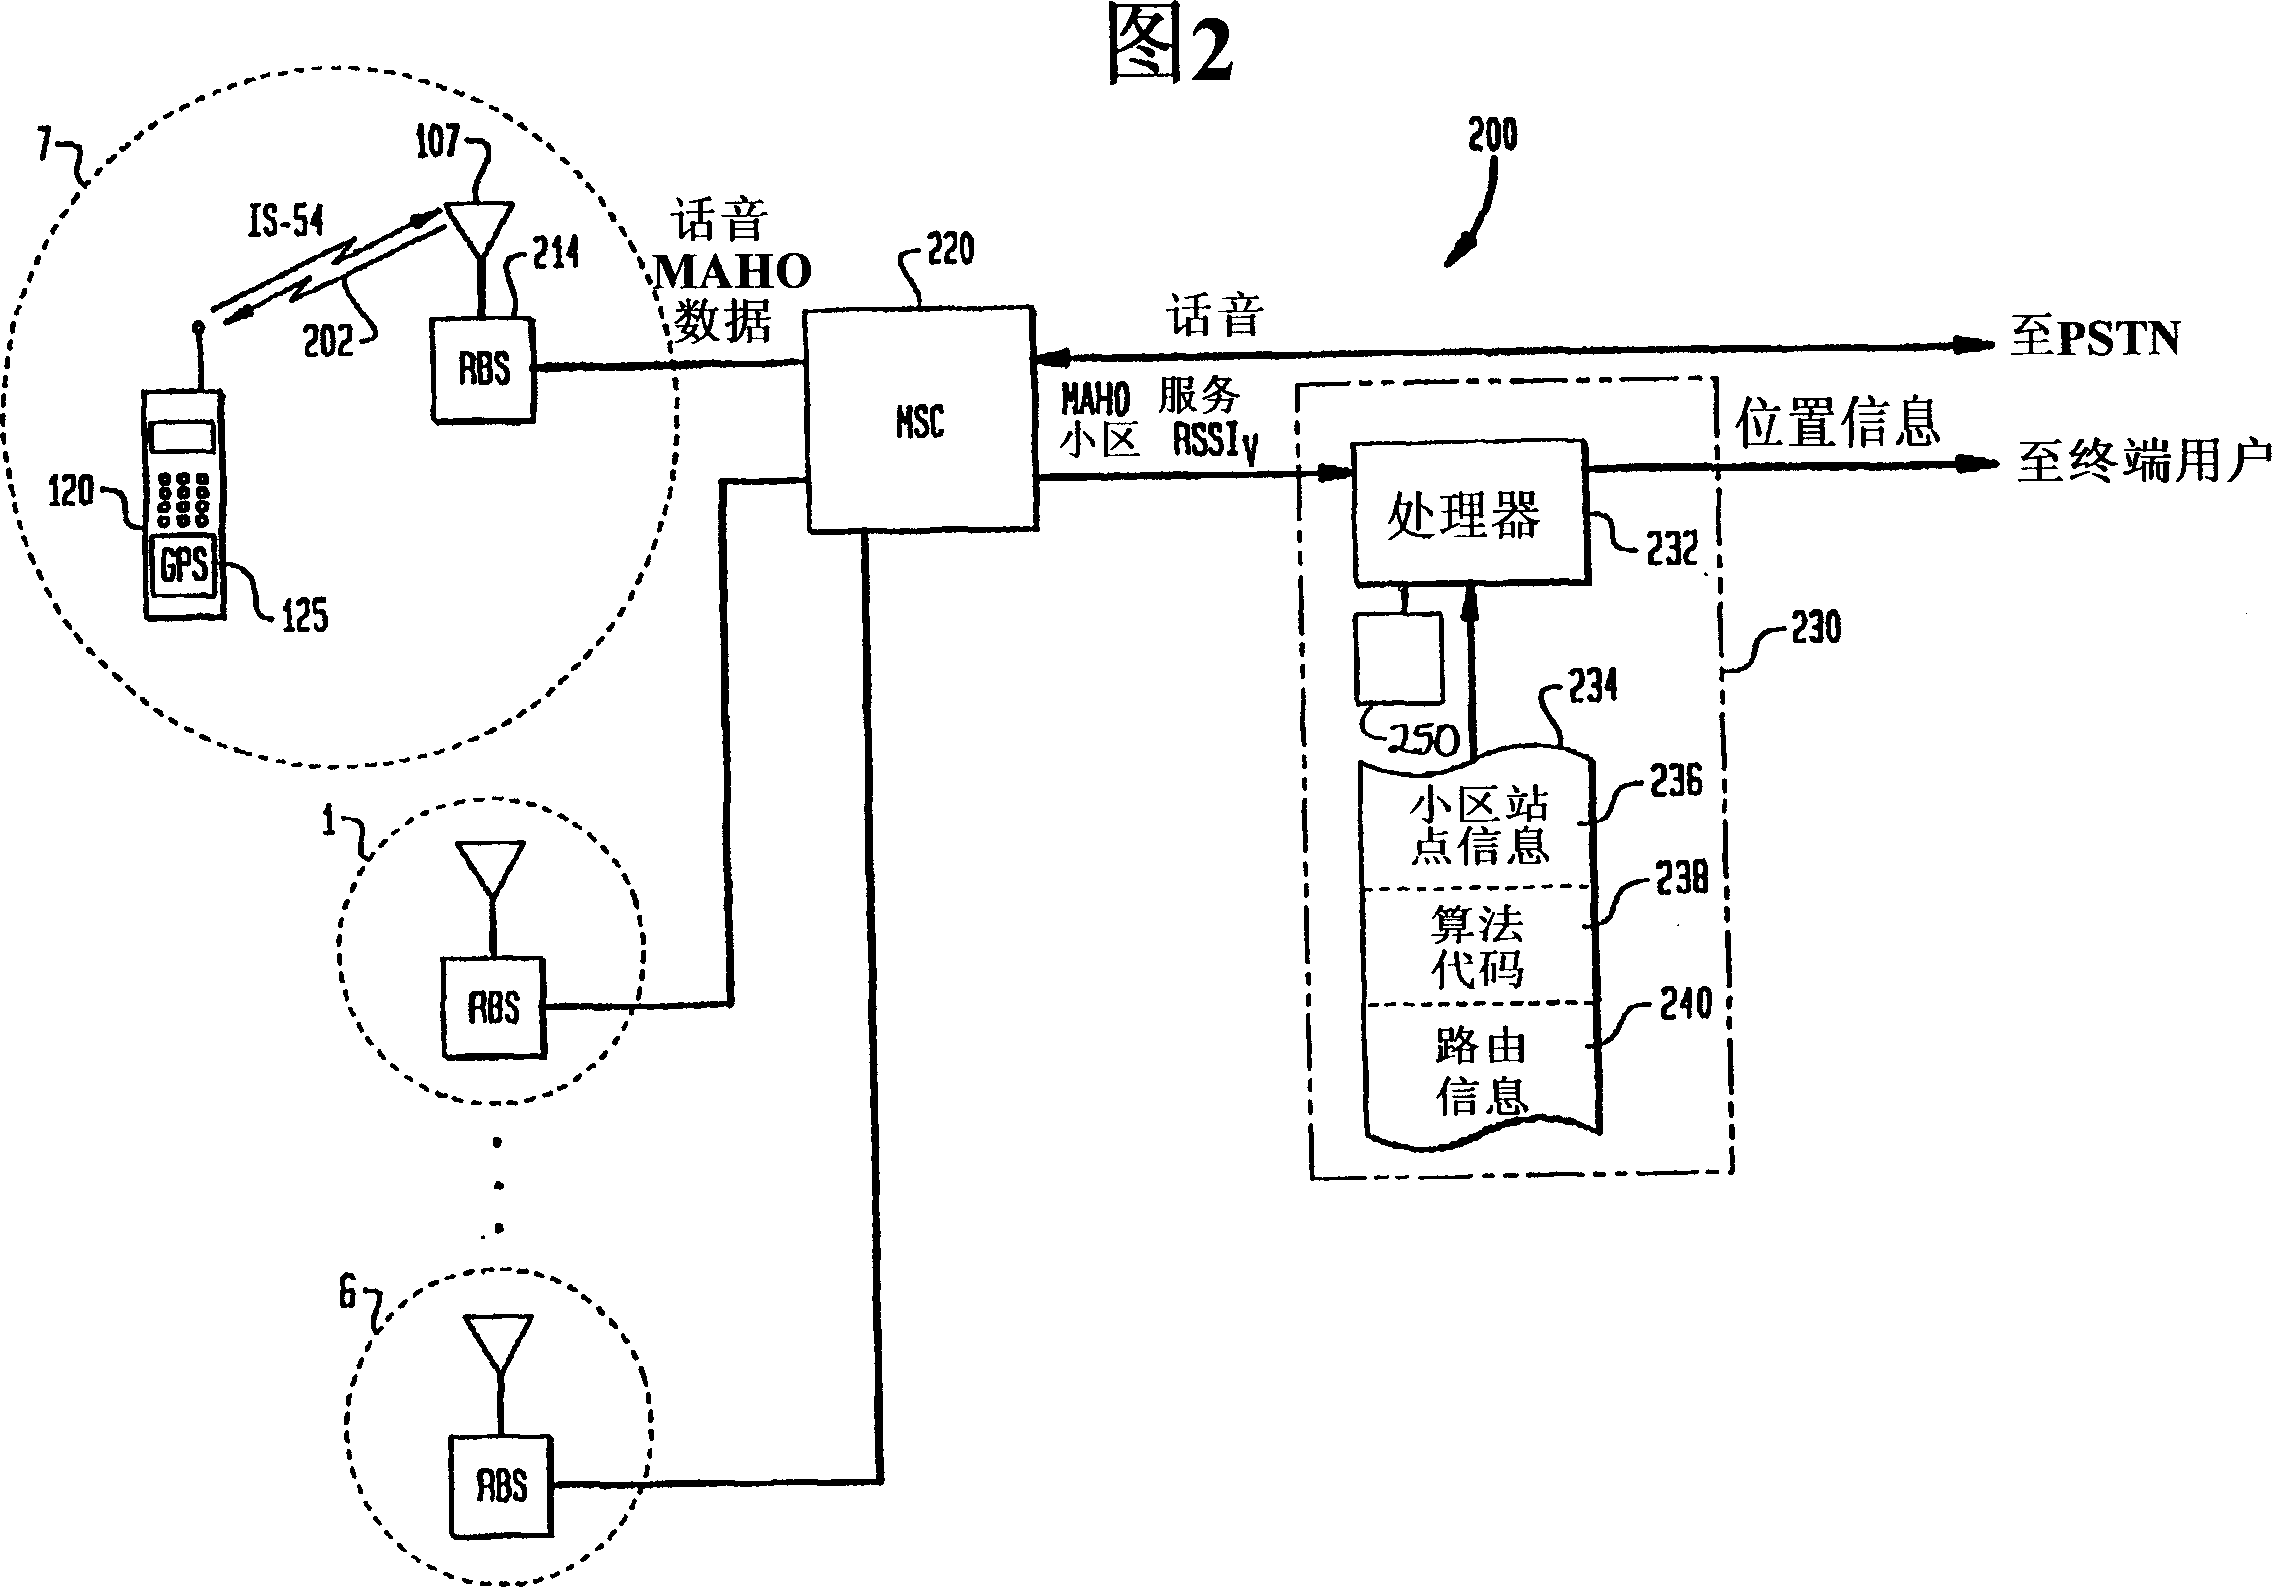 Method and apparatus for mobile station location estimation